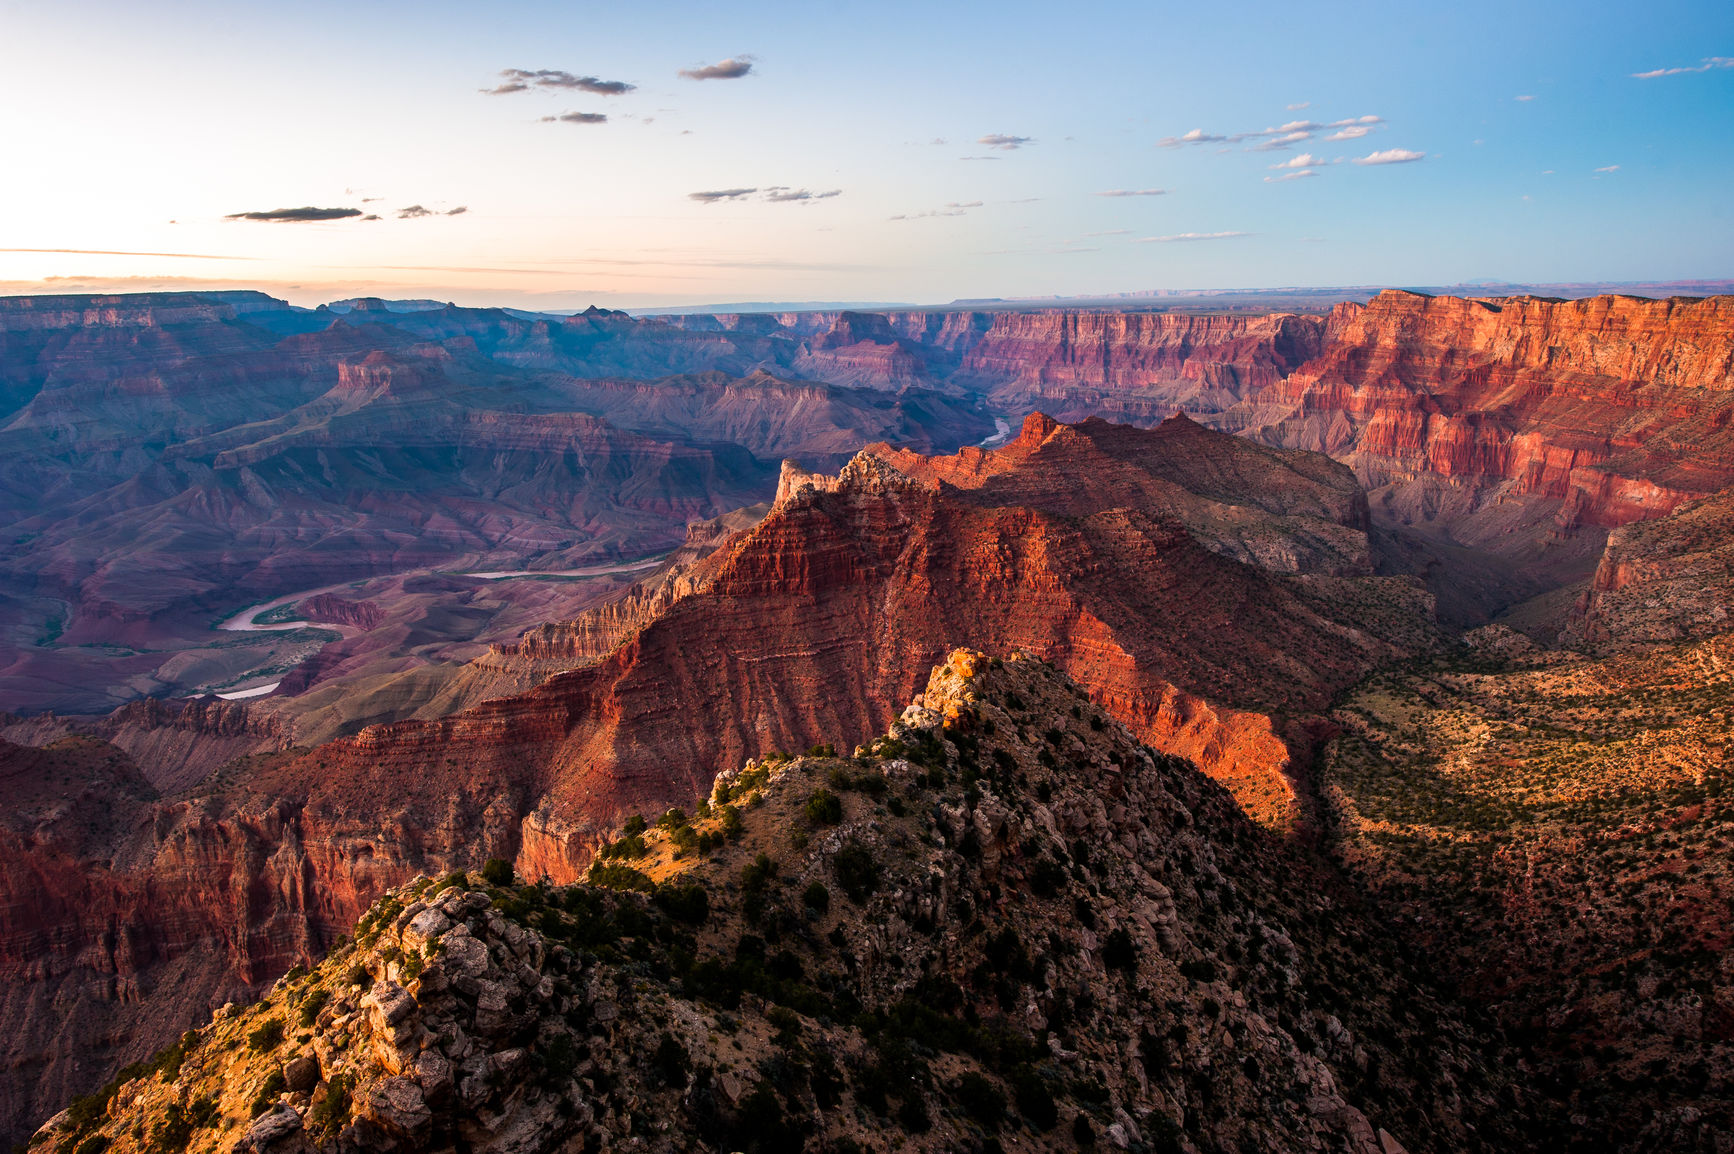 Sunset scenery from Grand Canyon South Rim, Grand Canyon National Park, USA